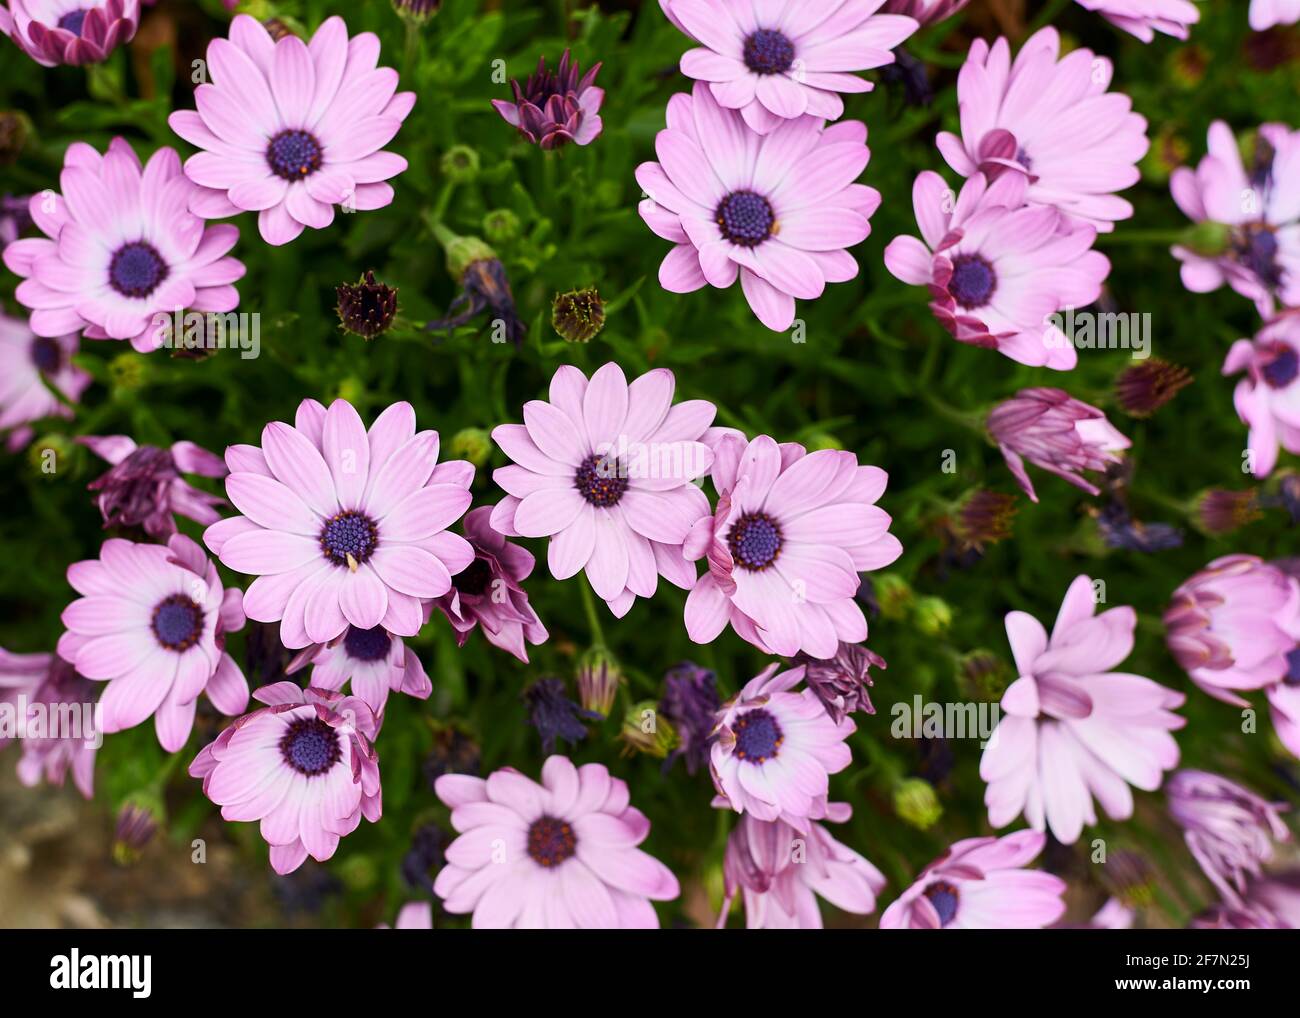 Group of small purple flowers on a green background. Osteospermum fruticosum, African daisy, detail photograph, background out of focus. Stock Photo